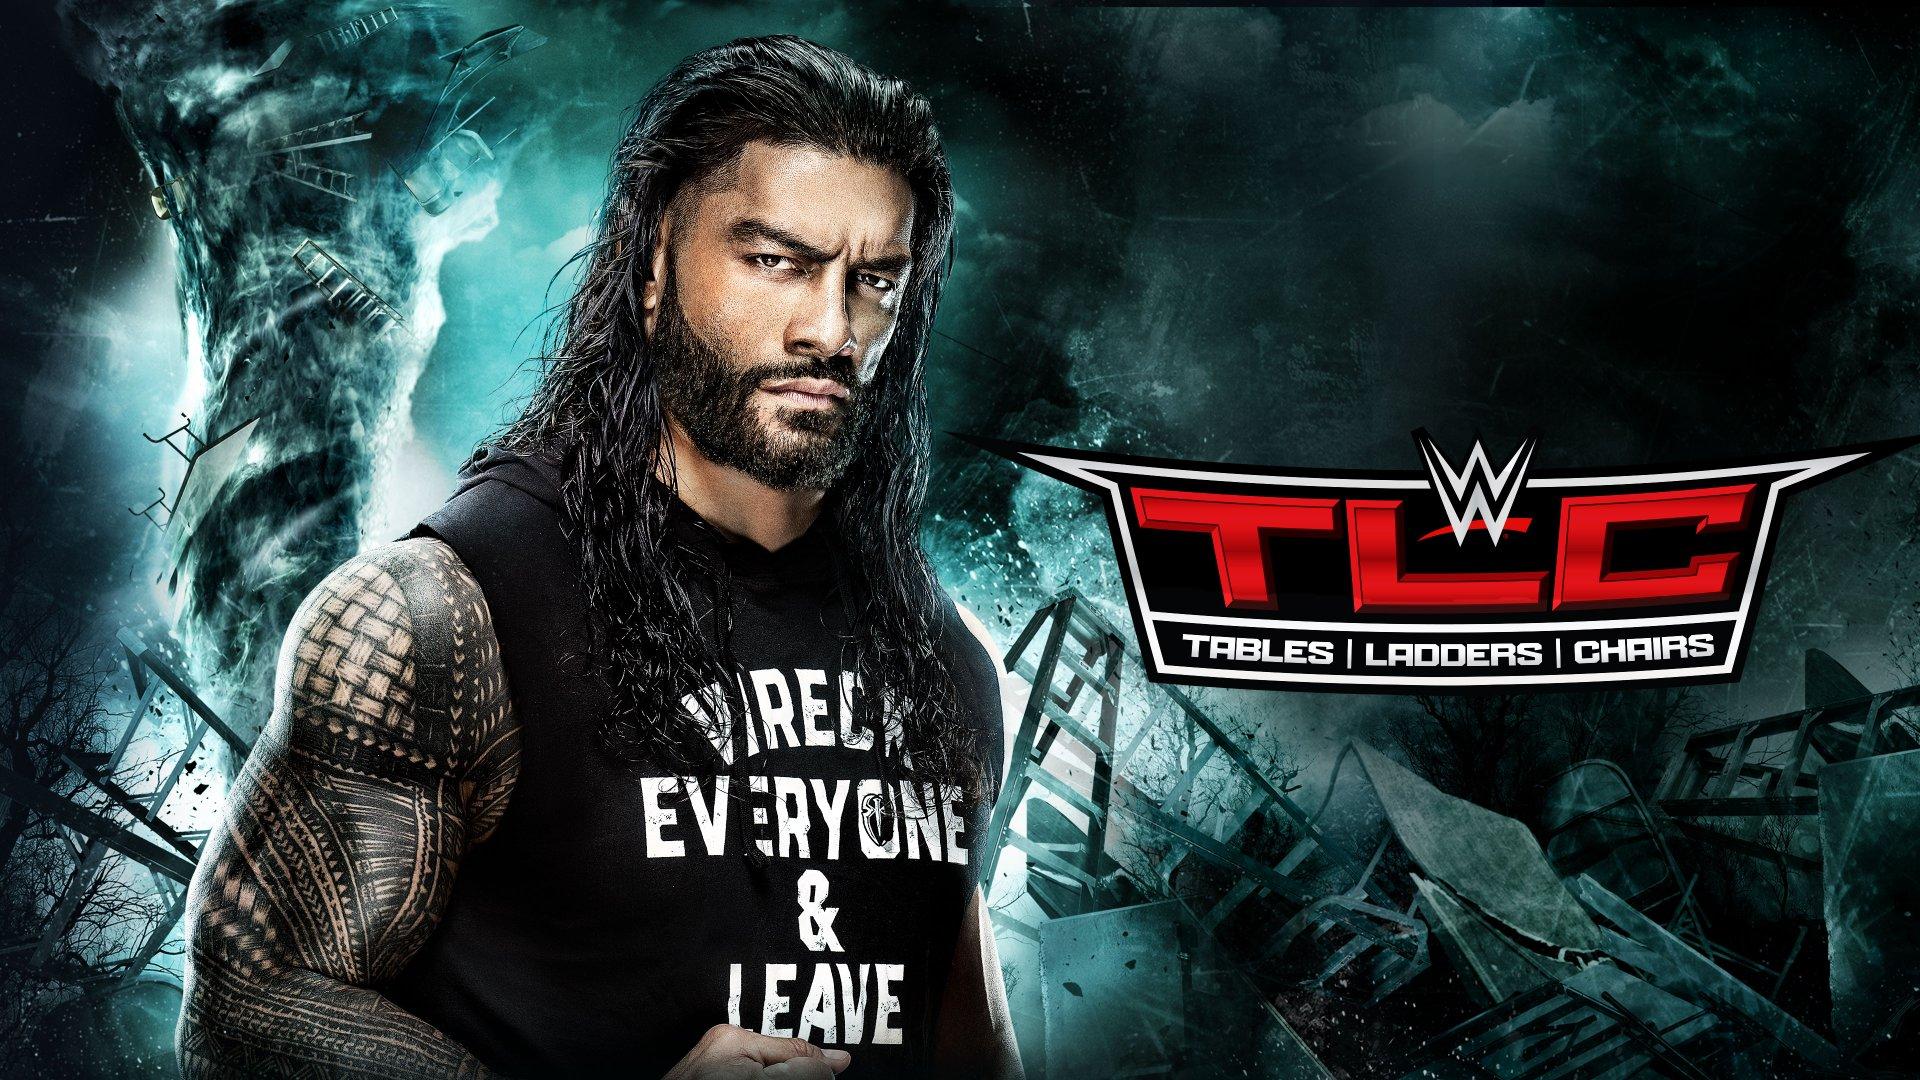 WWE TLC - Tables, Ladders & Chairs 2020